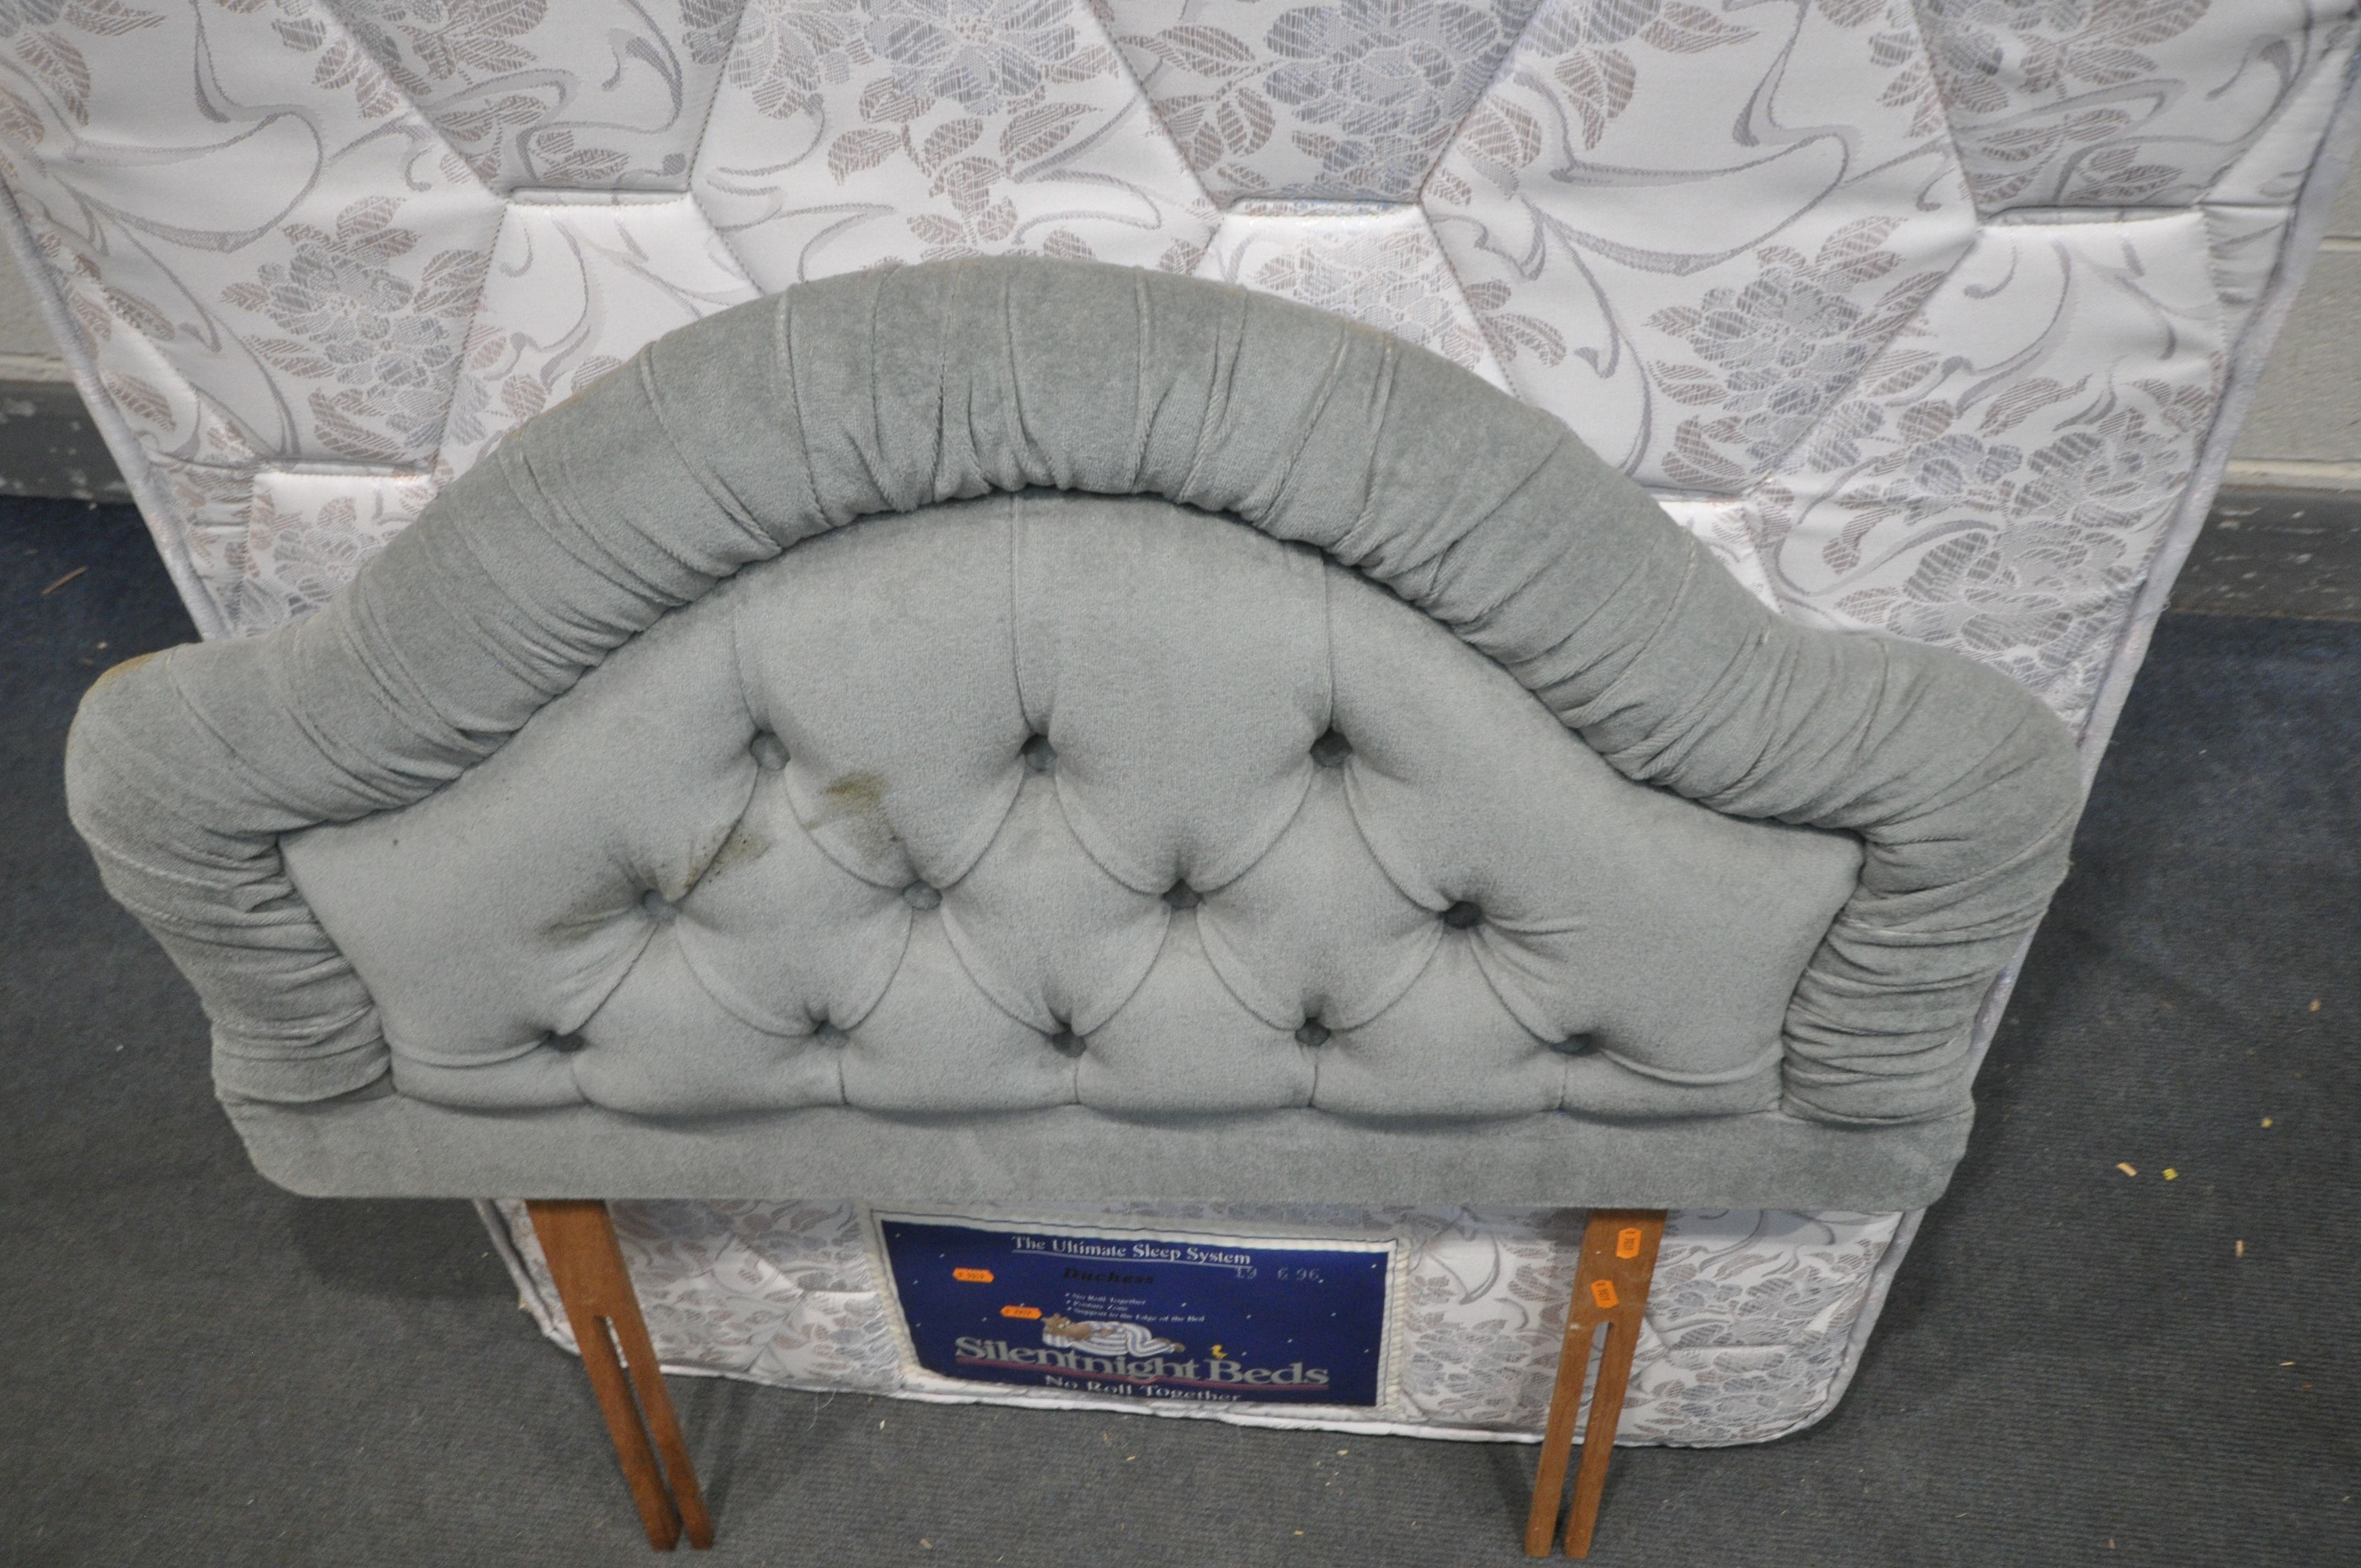 A SILENT NIGHT SINGLE DIVAN BED AND MATTRESS, with a grey headboard - Image 3 of 3